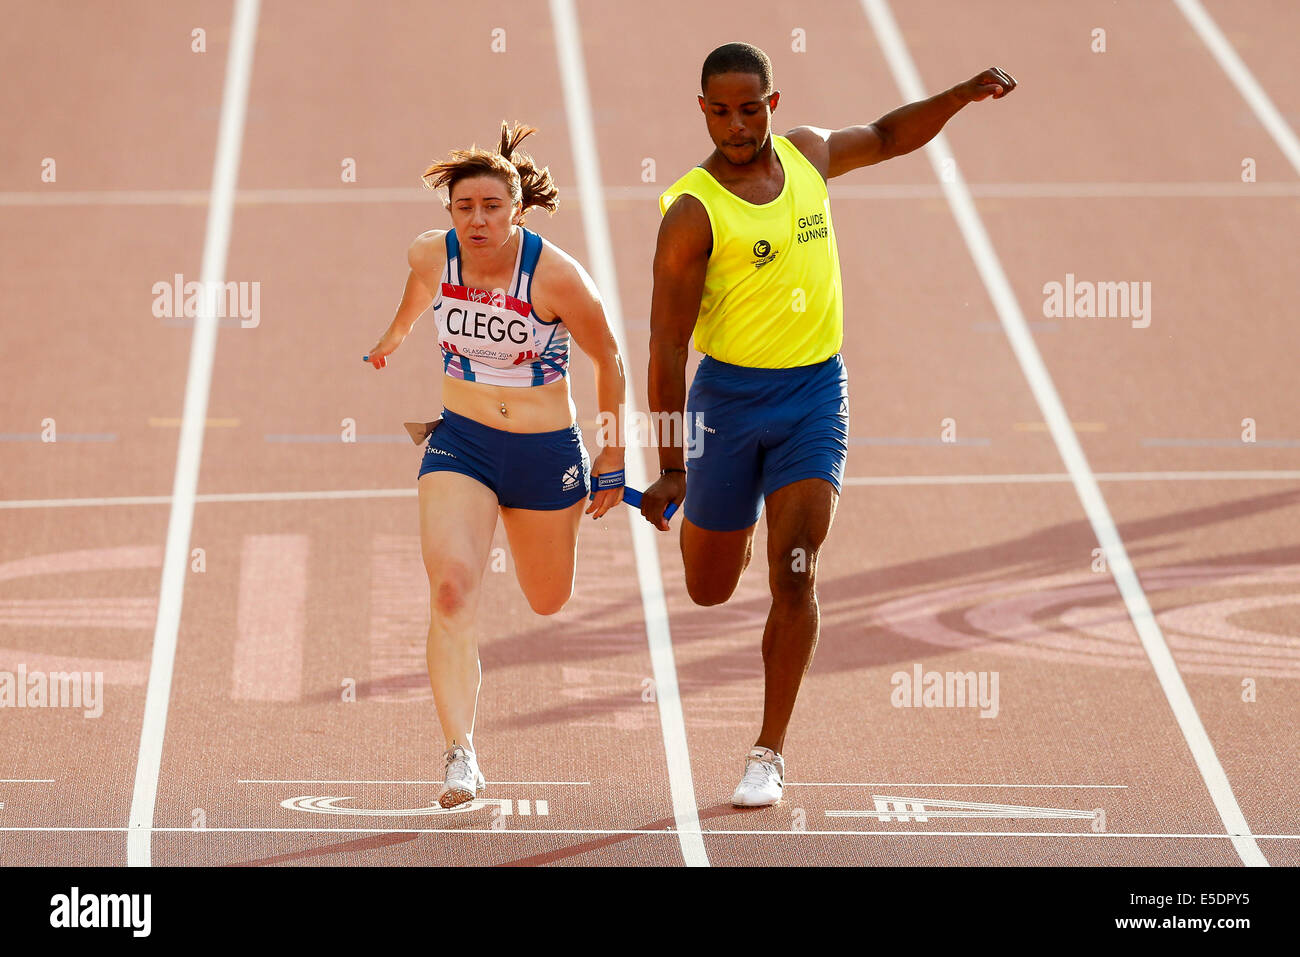 Glasgow, Scotland. 28th July, 2014. Glasgow 2014 Commonwealth Games Day 5. Athletics, Track and Field. Libby Clegg of England wins the Womens T11/12 100m Final with her Guide Runner in tow. © Action Plus Sports/Alamy Live News Stock Photo